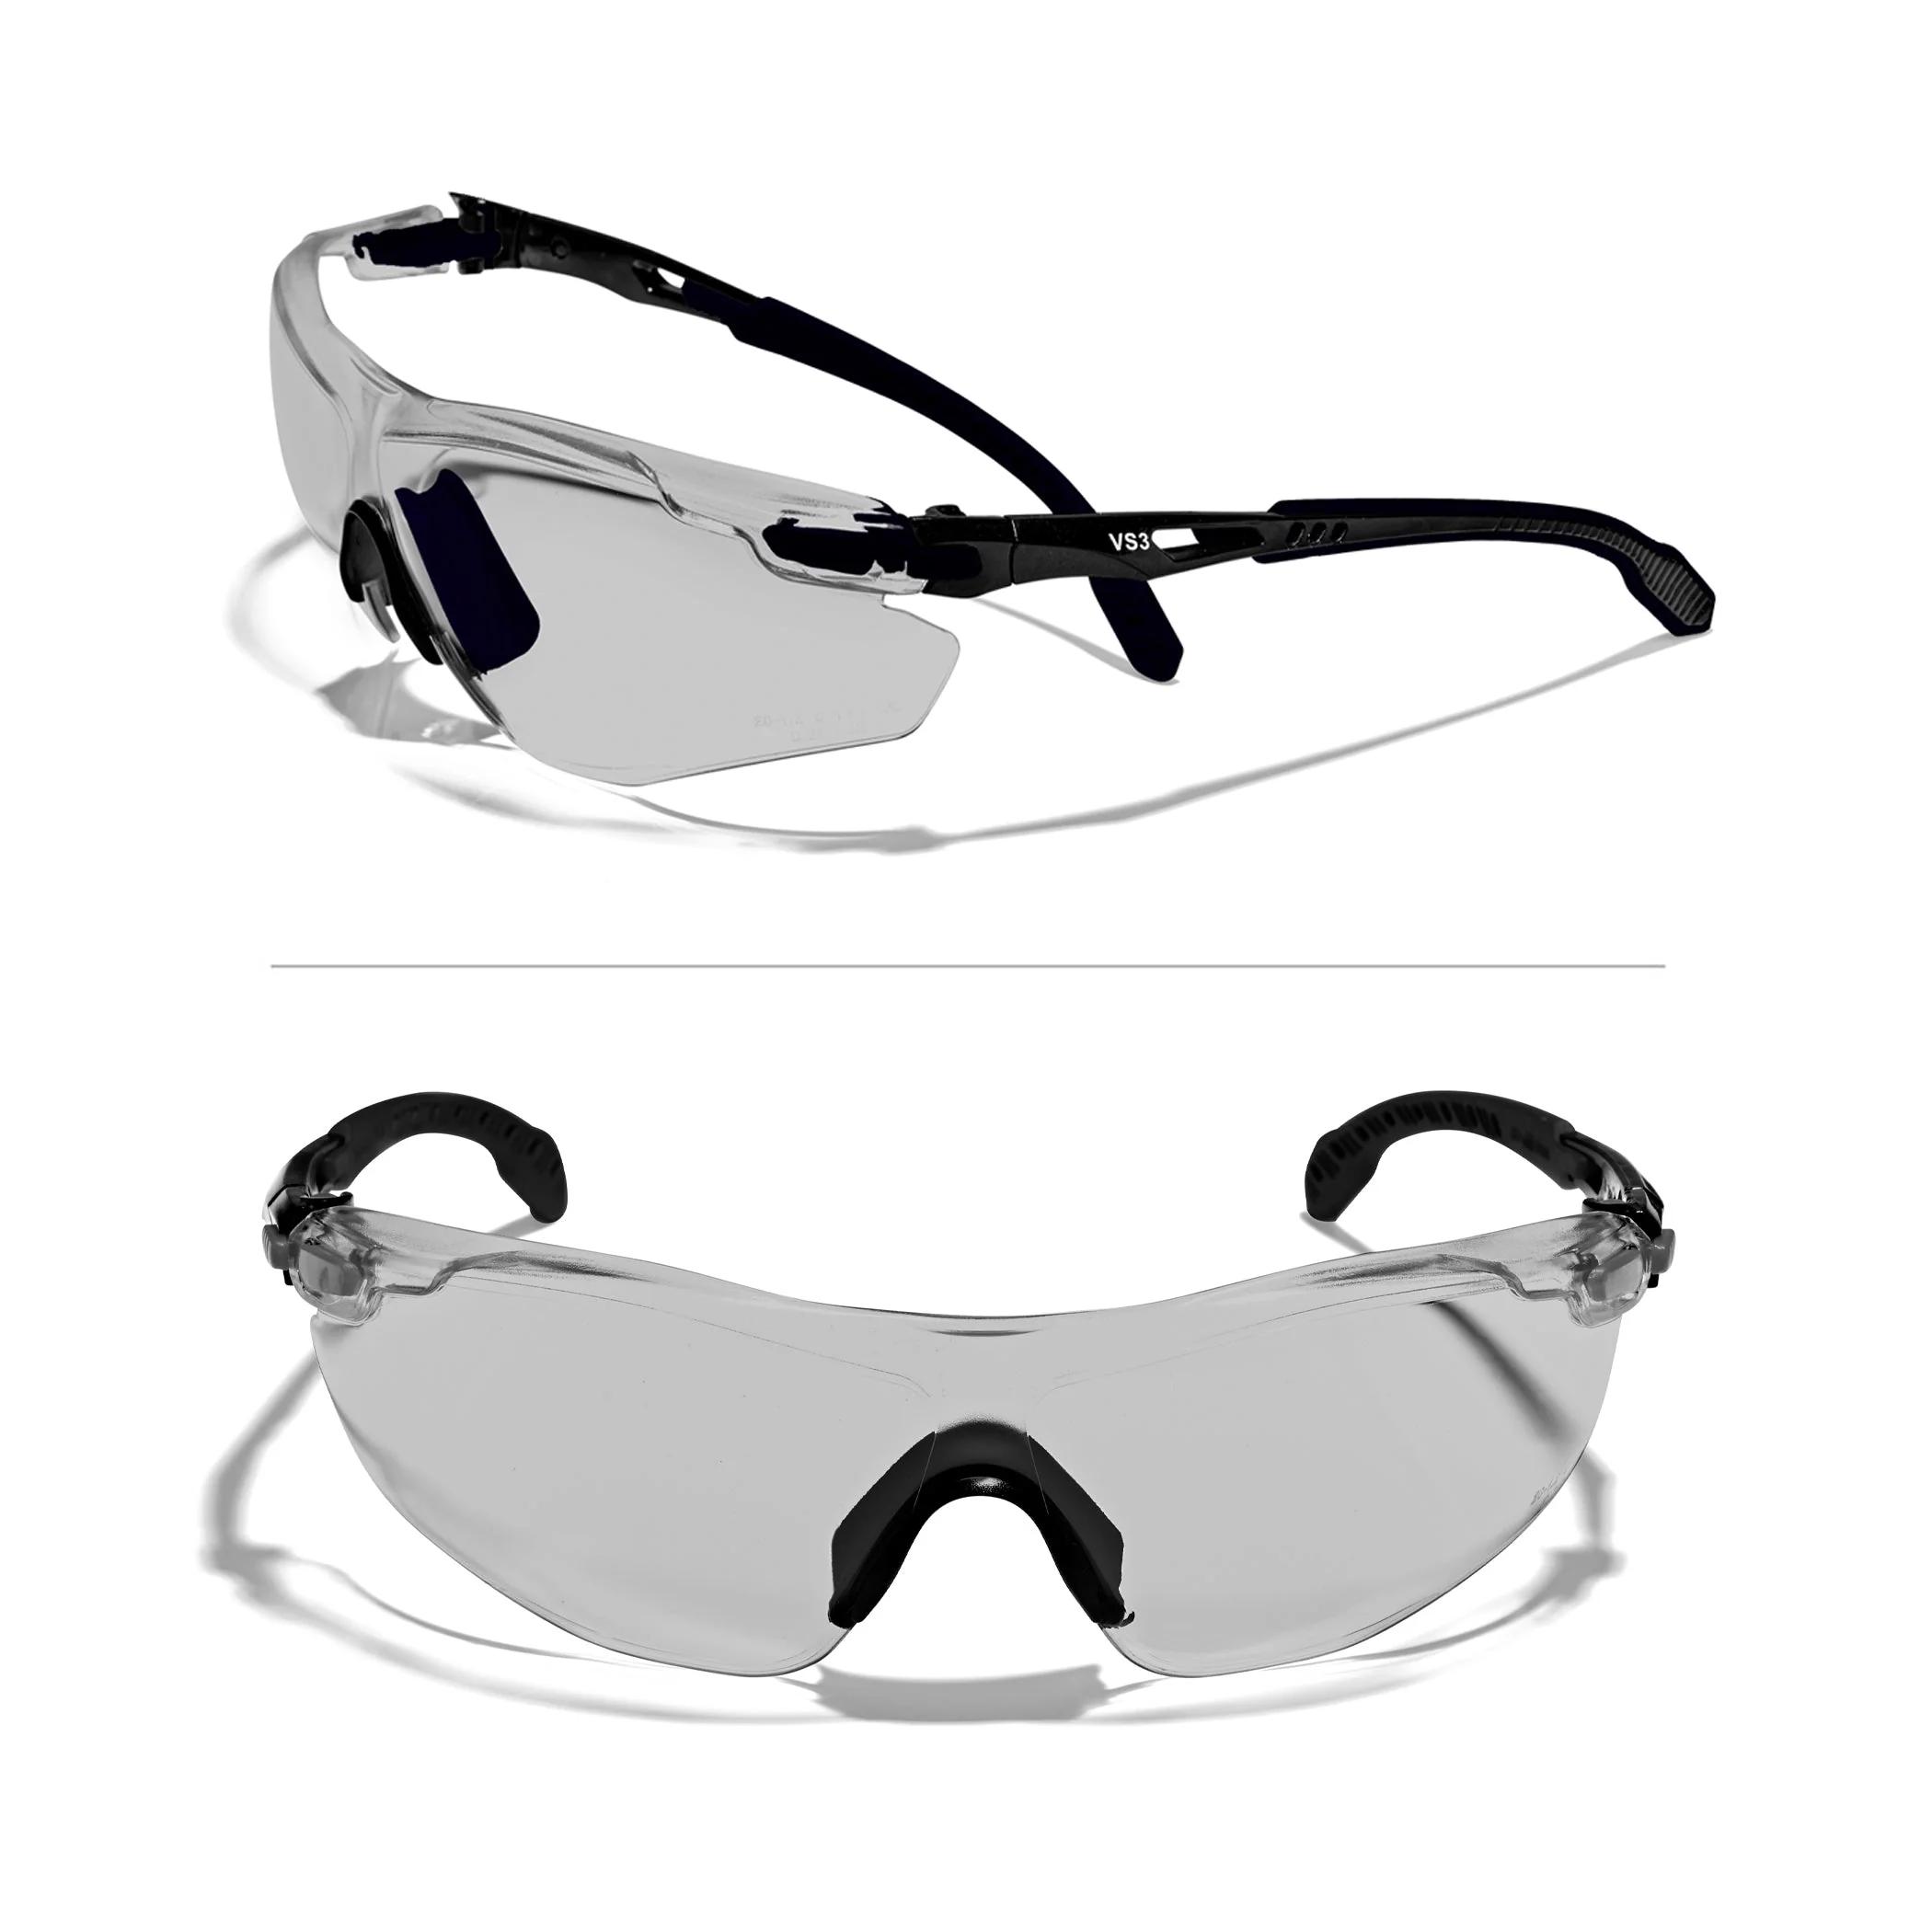 smoked safety glasses - Are tinted safety glasses allowed